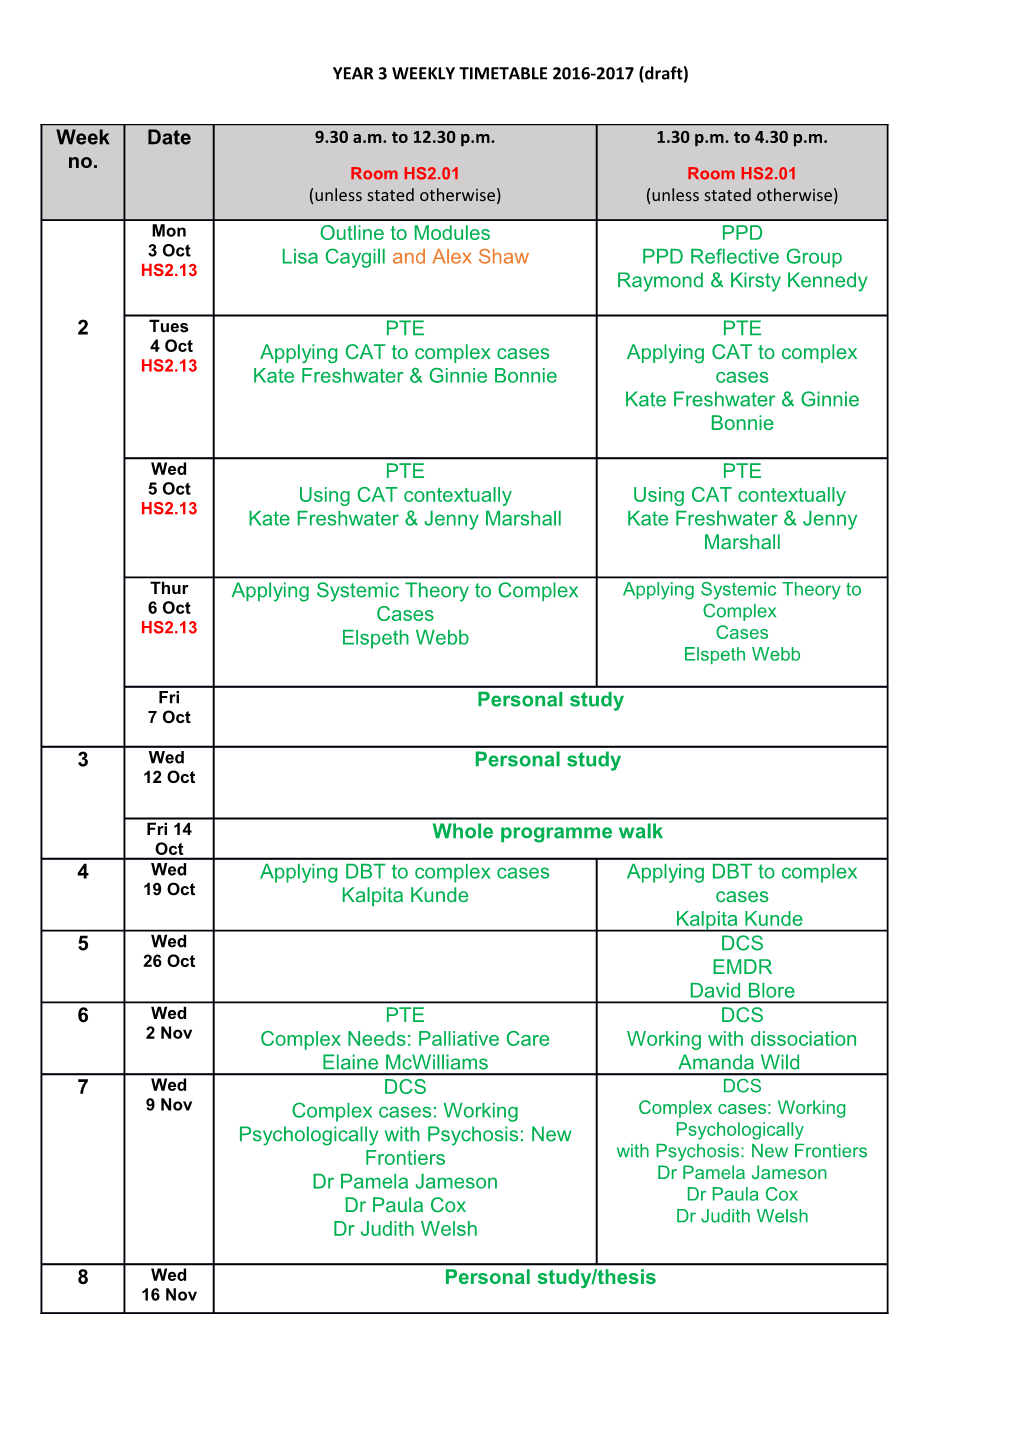 YEAR 3 WEEKLY TIMETABLE 2016-2017 (Draft)